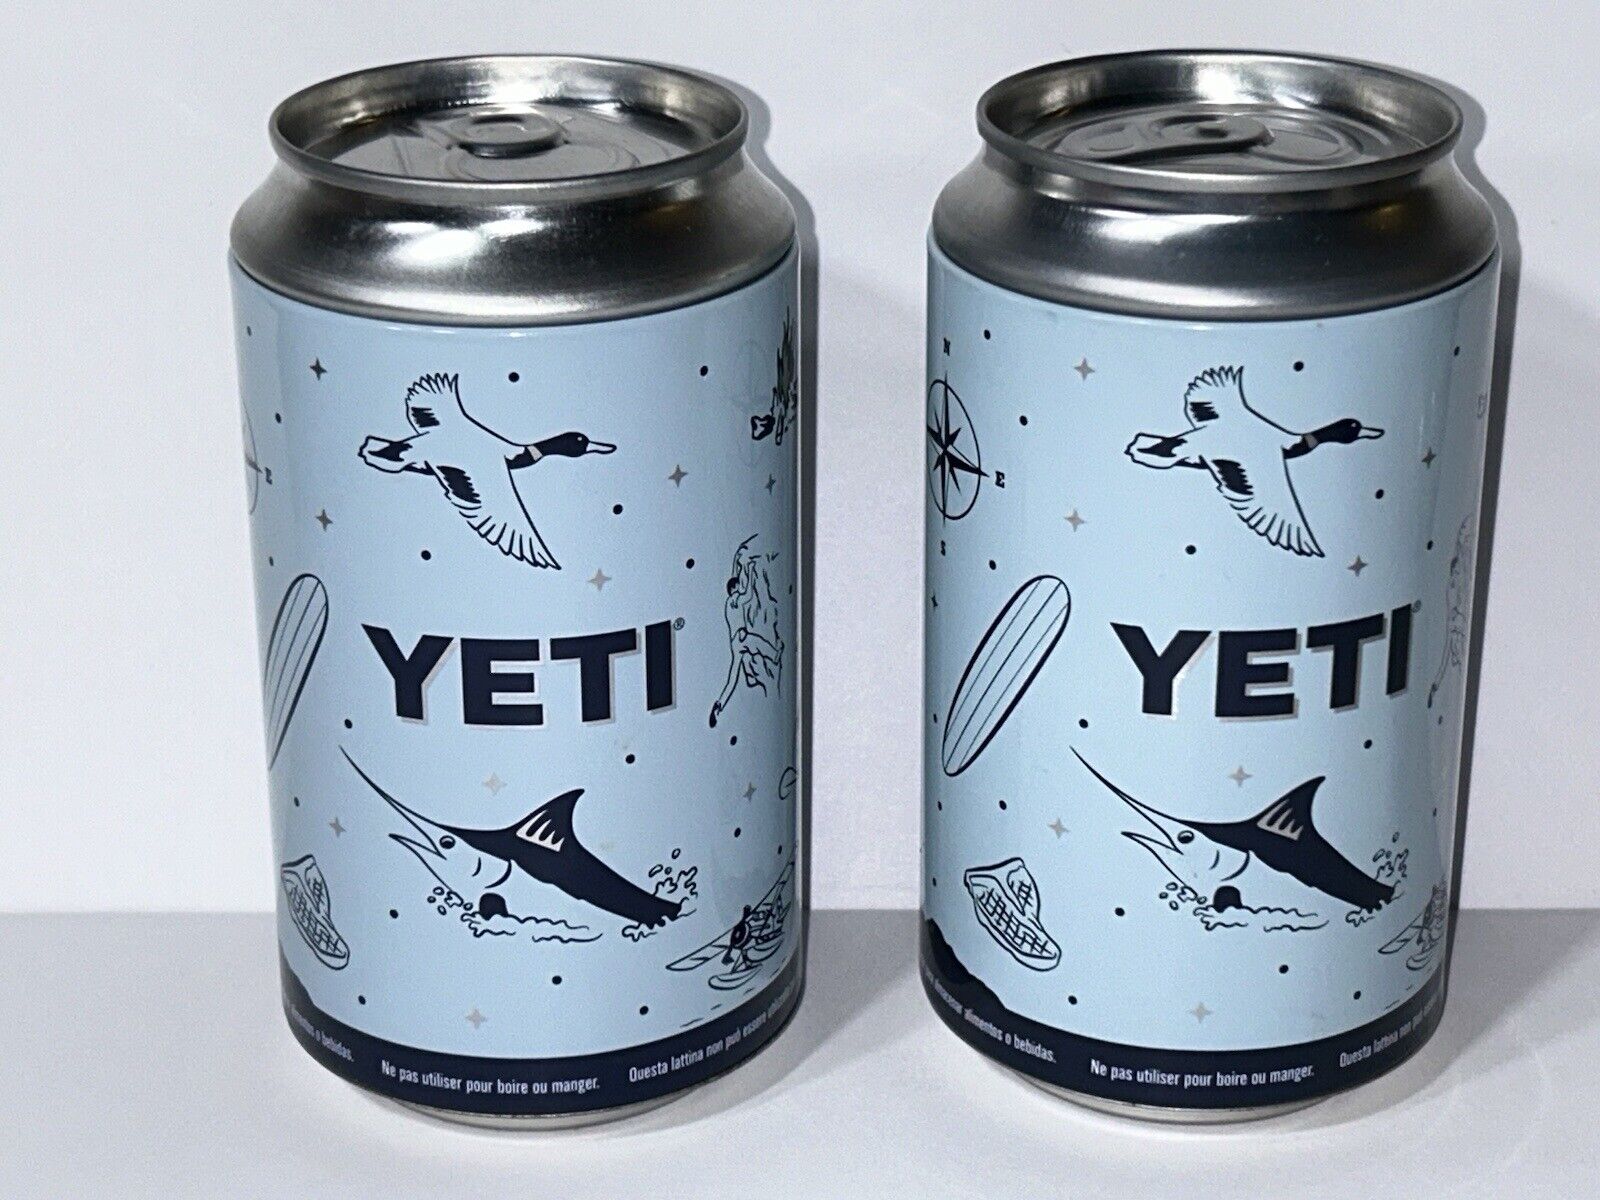 YETI Limited Edition Storage Cans 2 YETI Canisters Pop Top Cans YETI Lot of 2